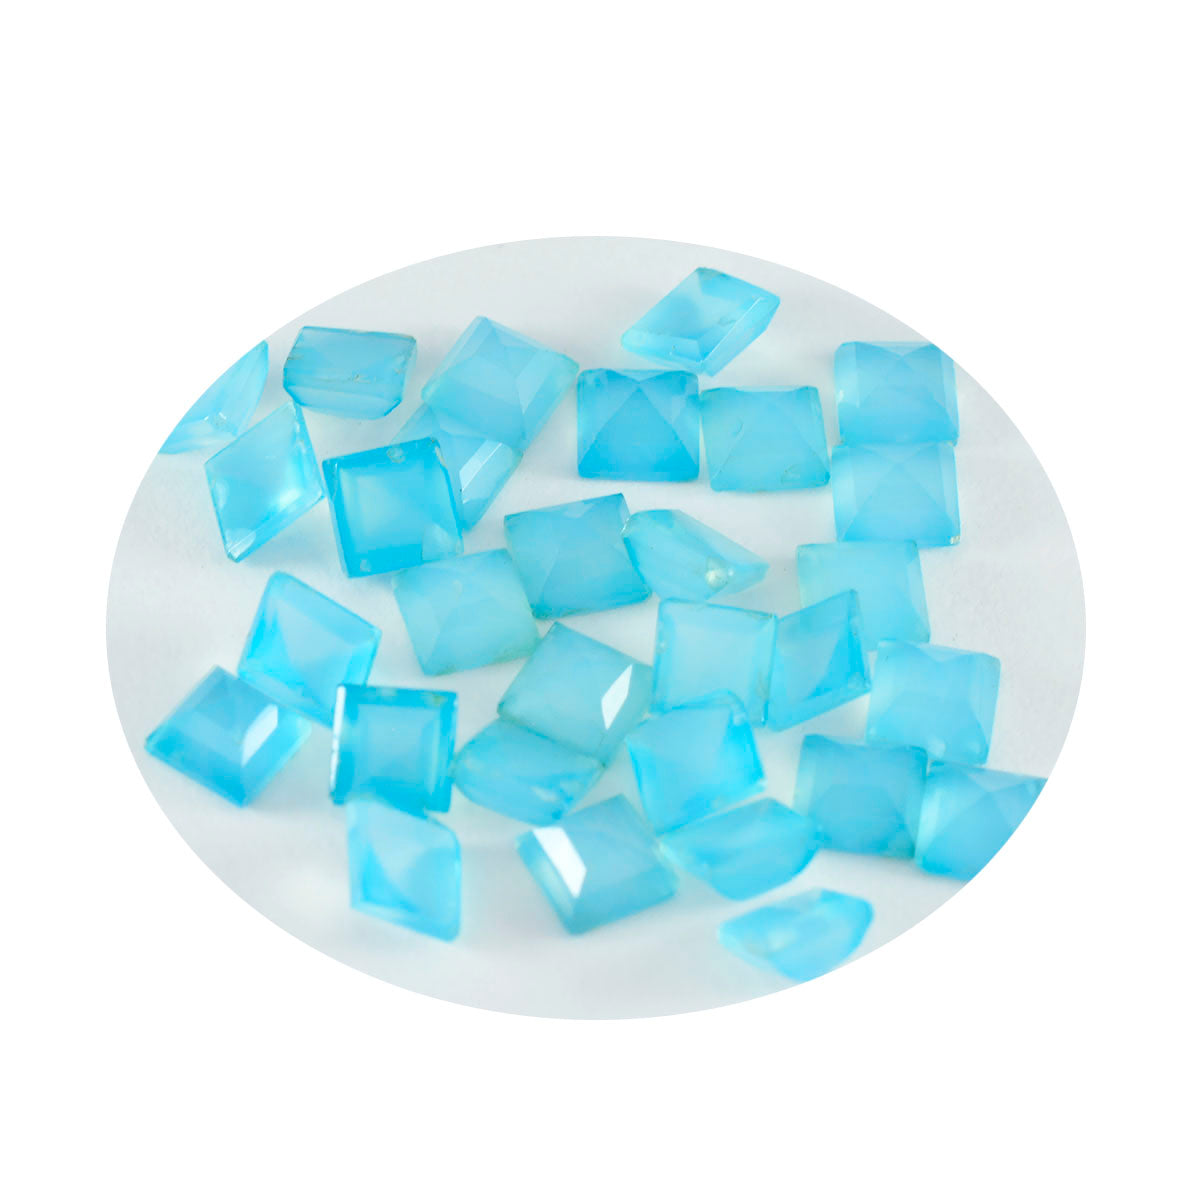 Riyogems 1PC Genuine Blue Chalcedony Faceted 3x3 mm Square Shape AA Quality Gems